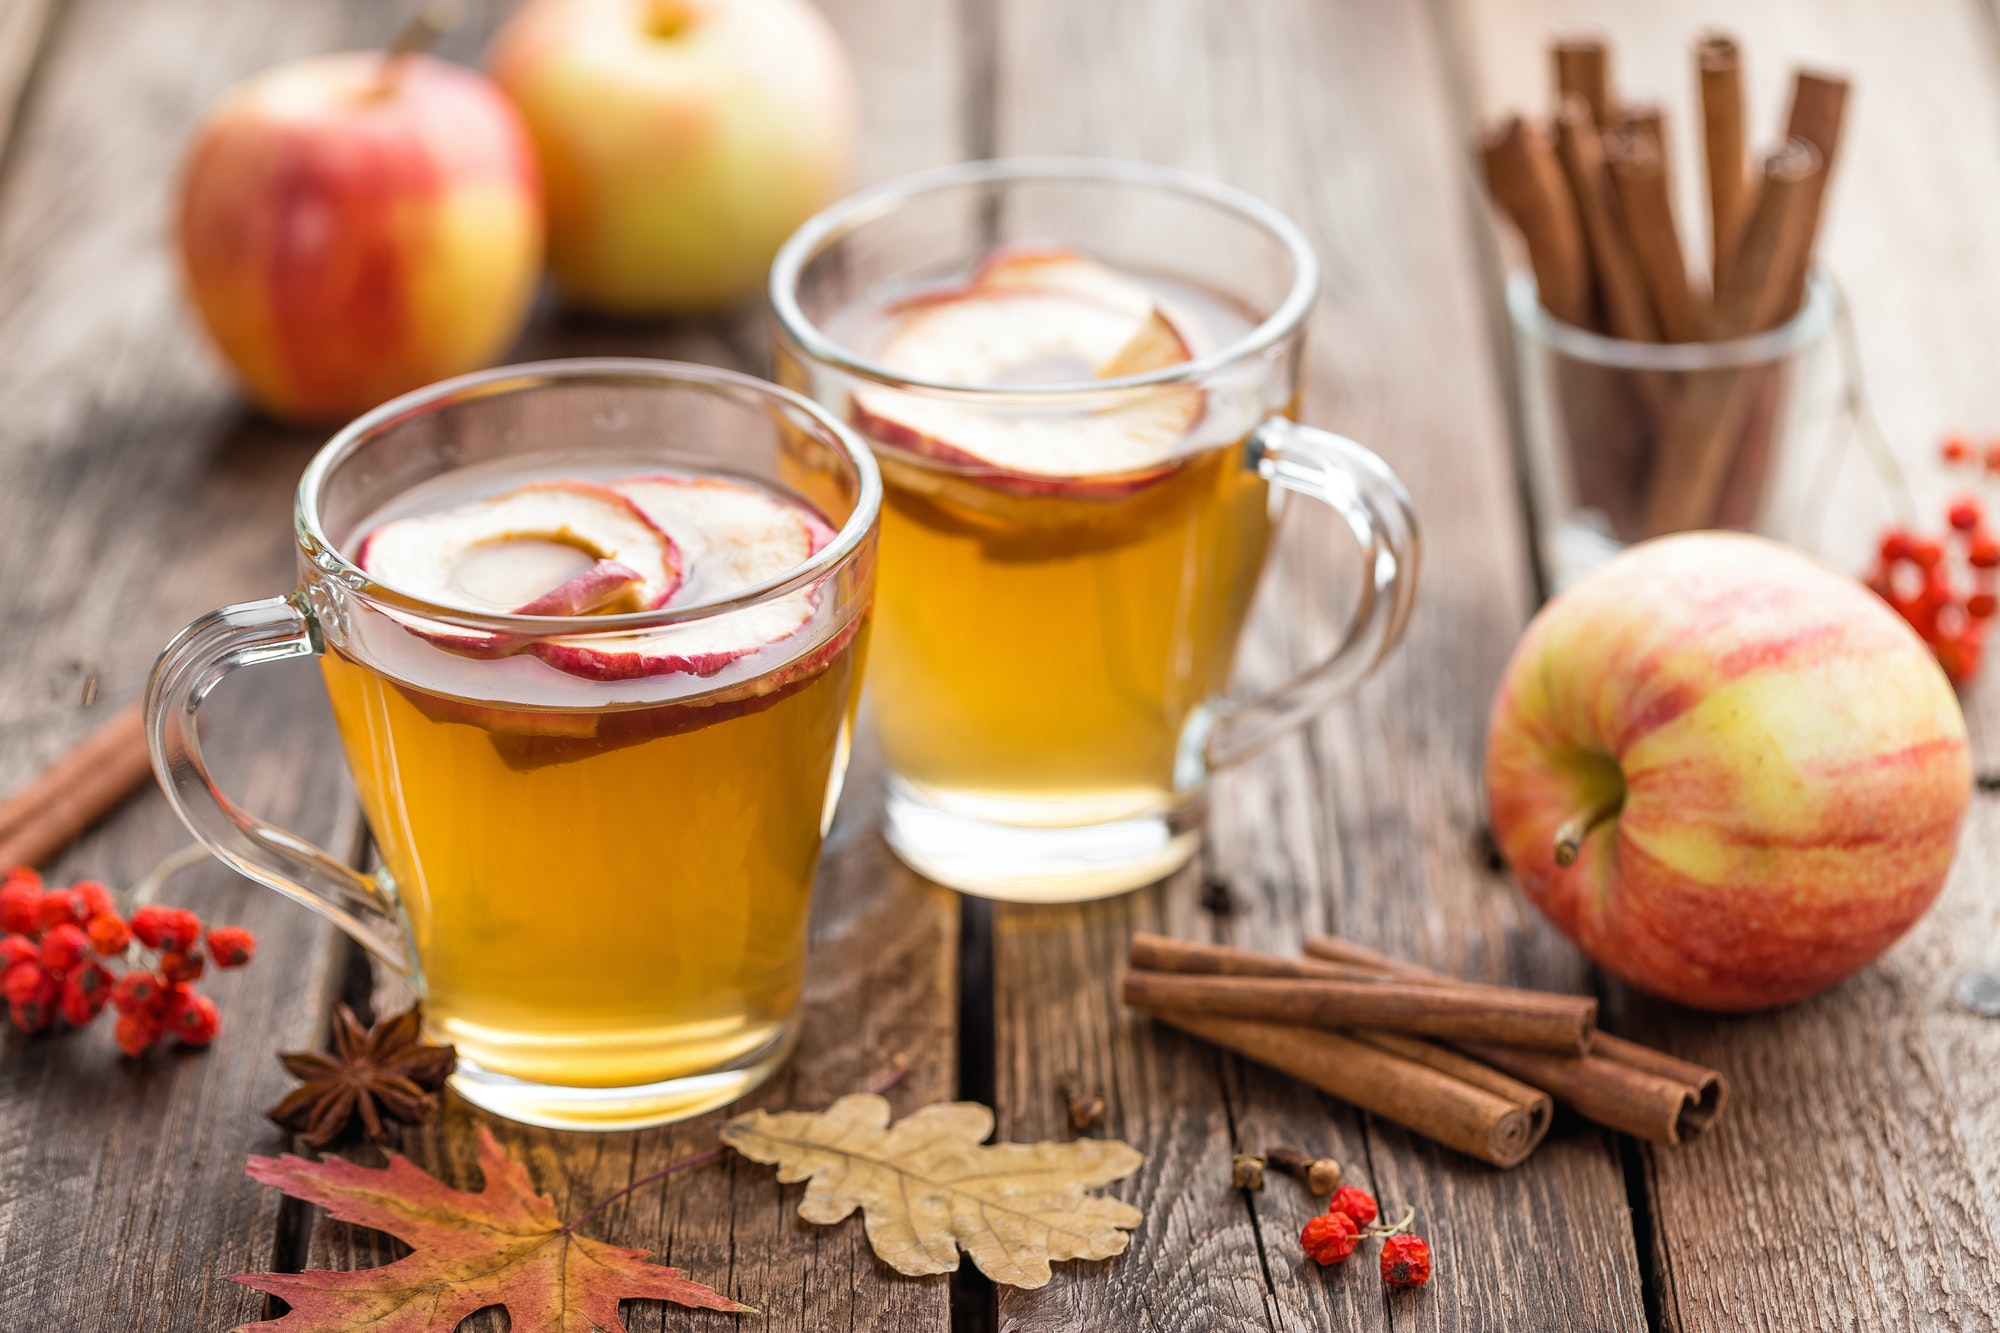 The Perfect Fall Drink